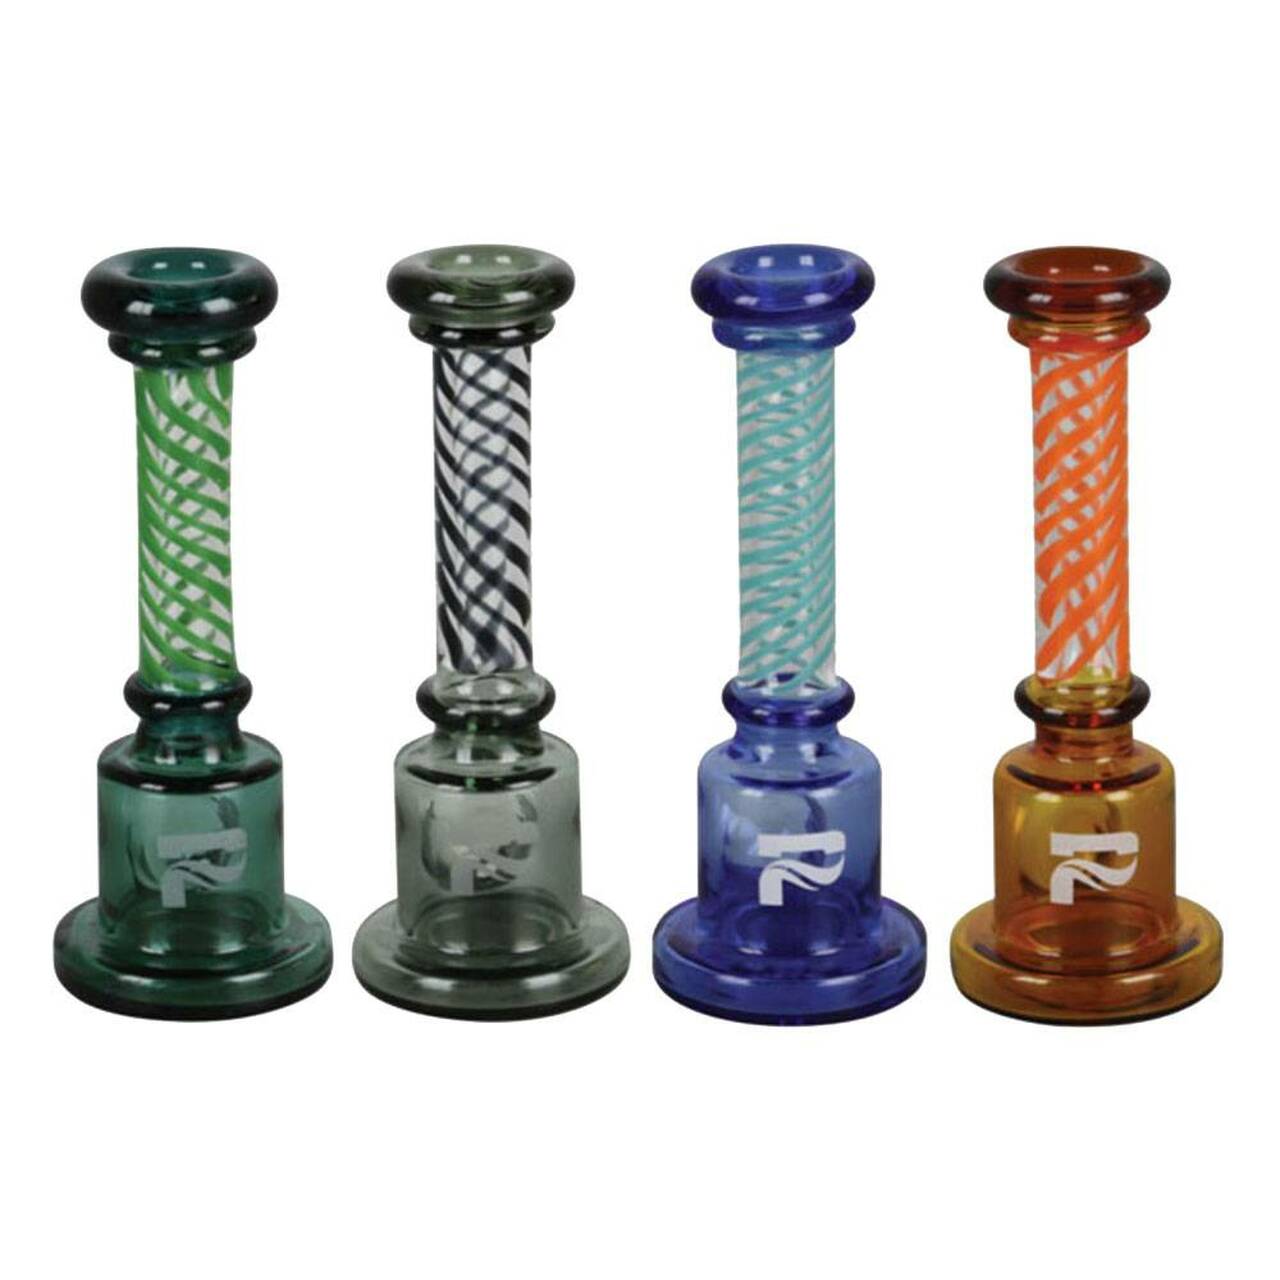 4 different coloured stand up chillums from Pulsar